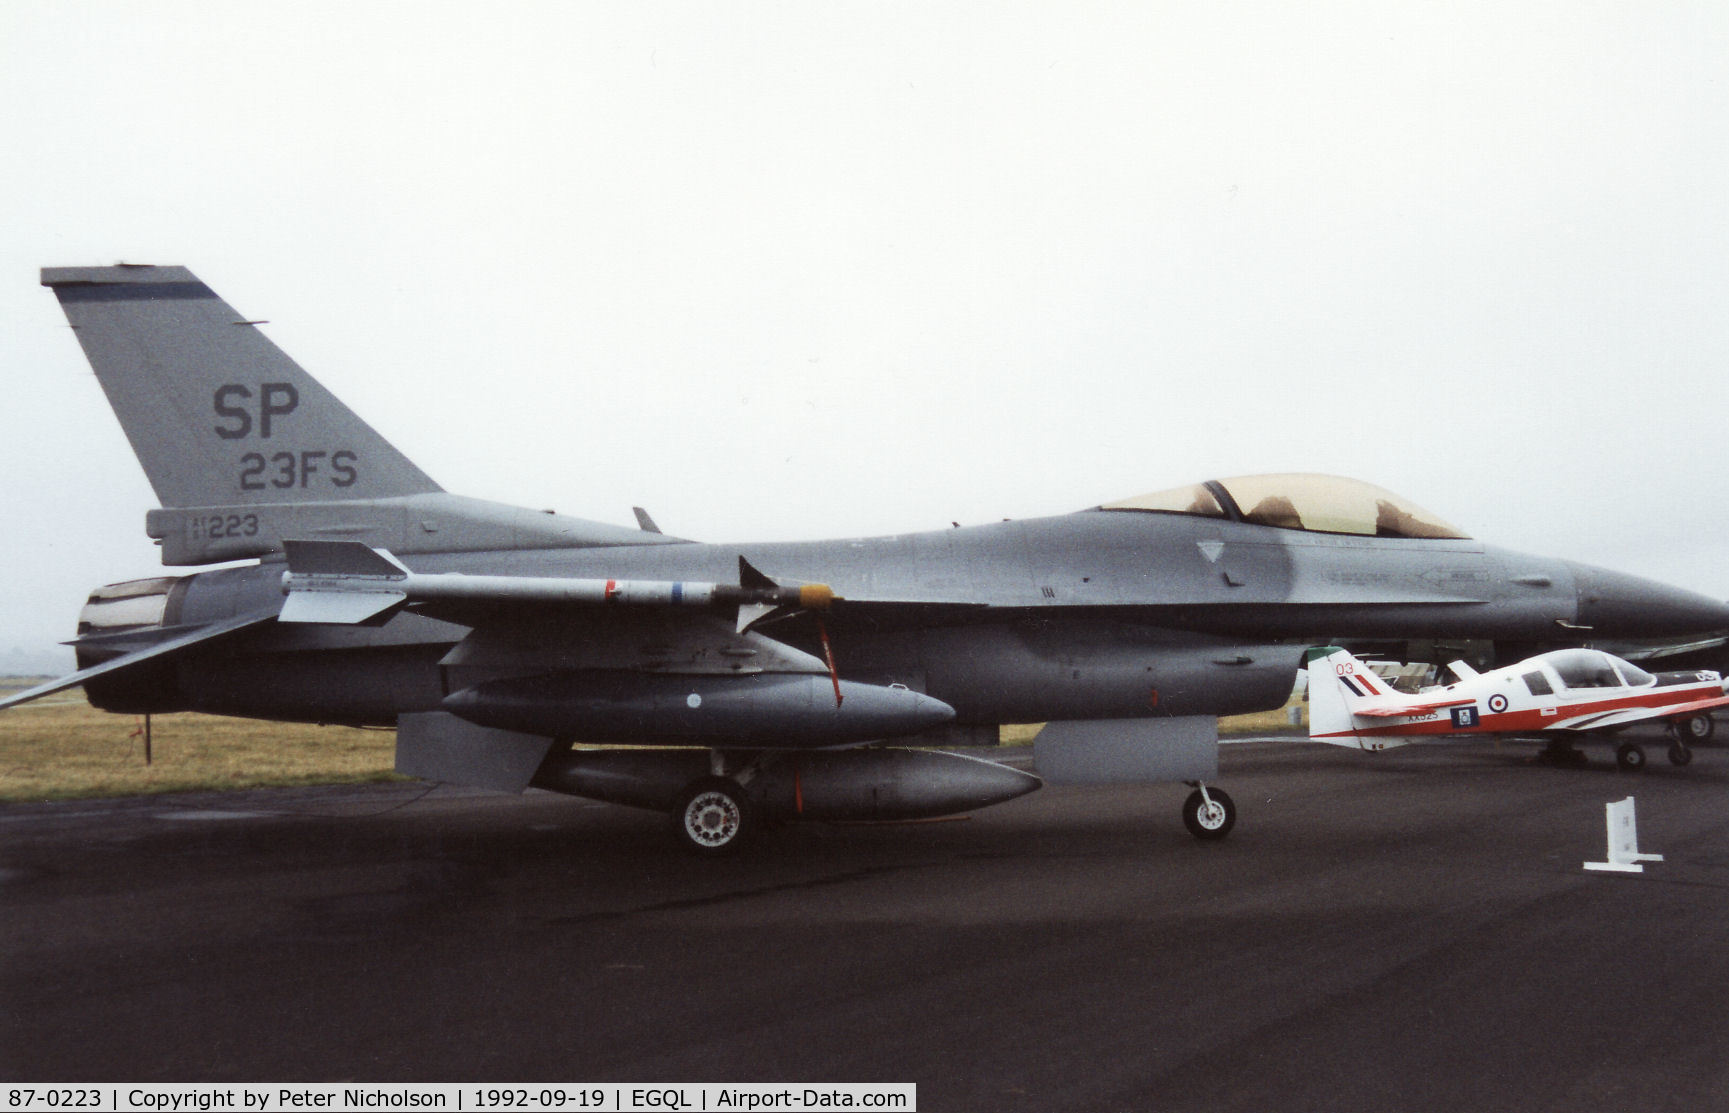 87-0223, 1987 General Dynamics F-16C Fighting Falcon C/N 5C-484, F-16C Falcon of 23rd Fighter Squadron/52nd Fighter Wing based at Spangdahlem in the static park at the 1992 RAF Leuchars Airshow.